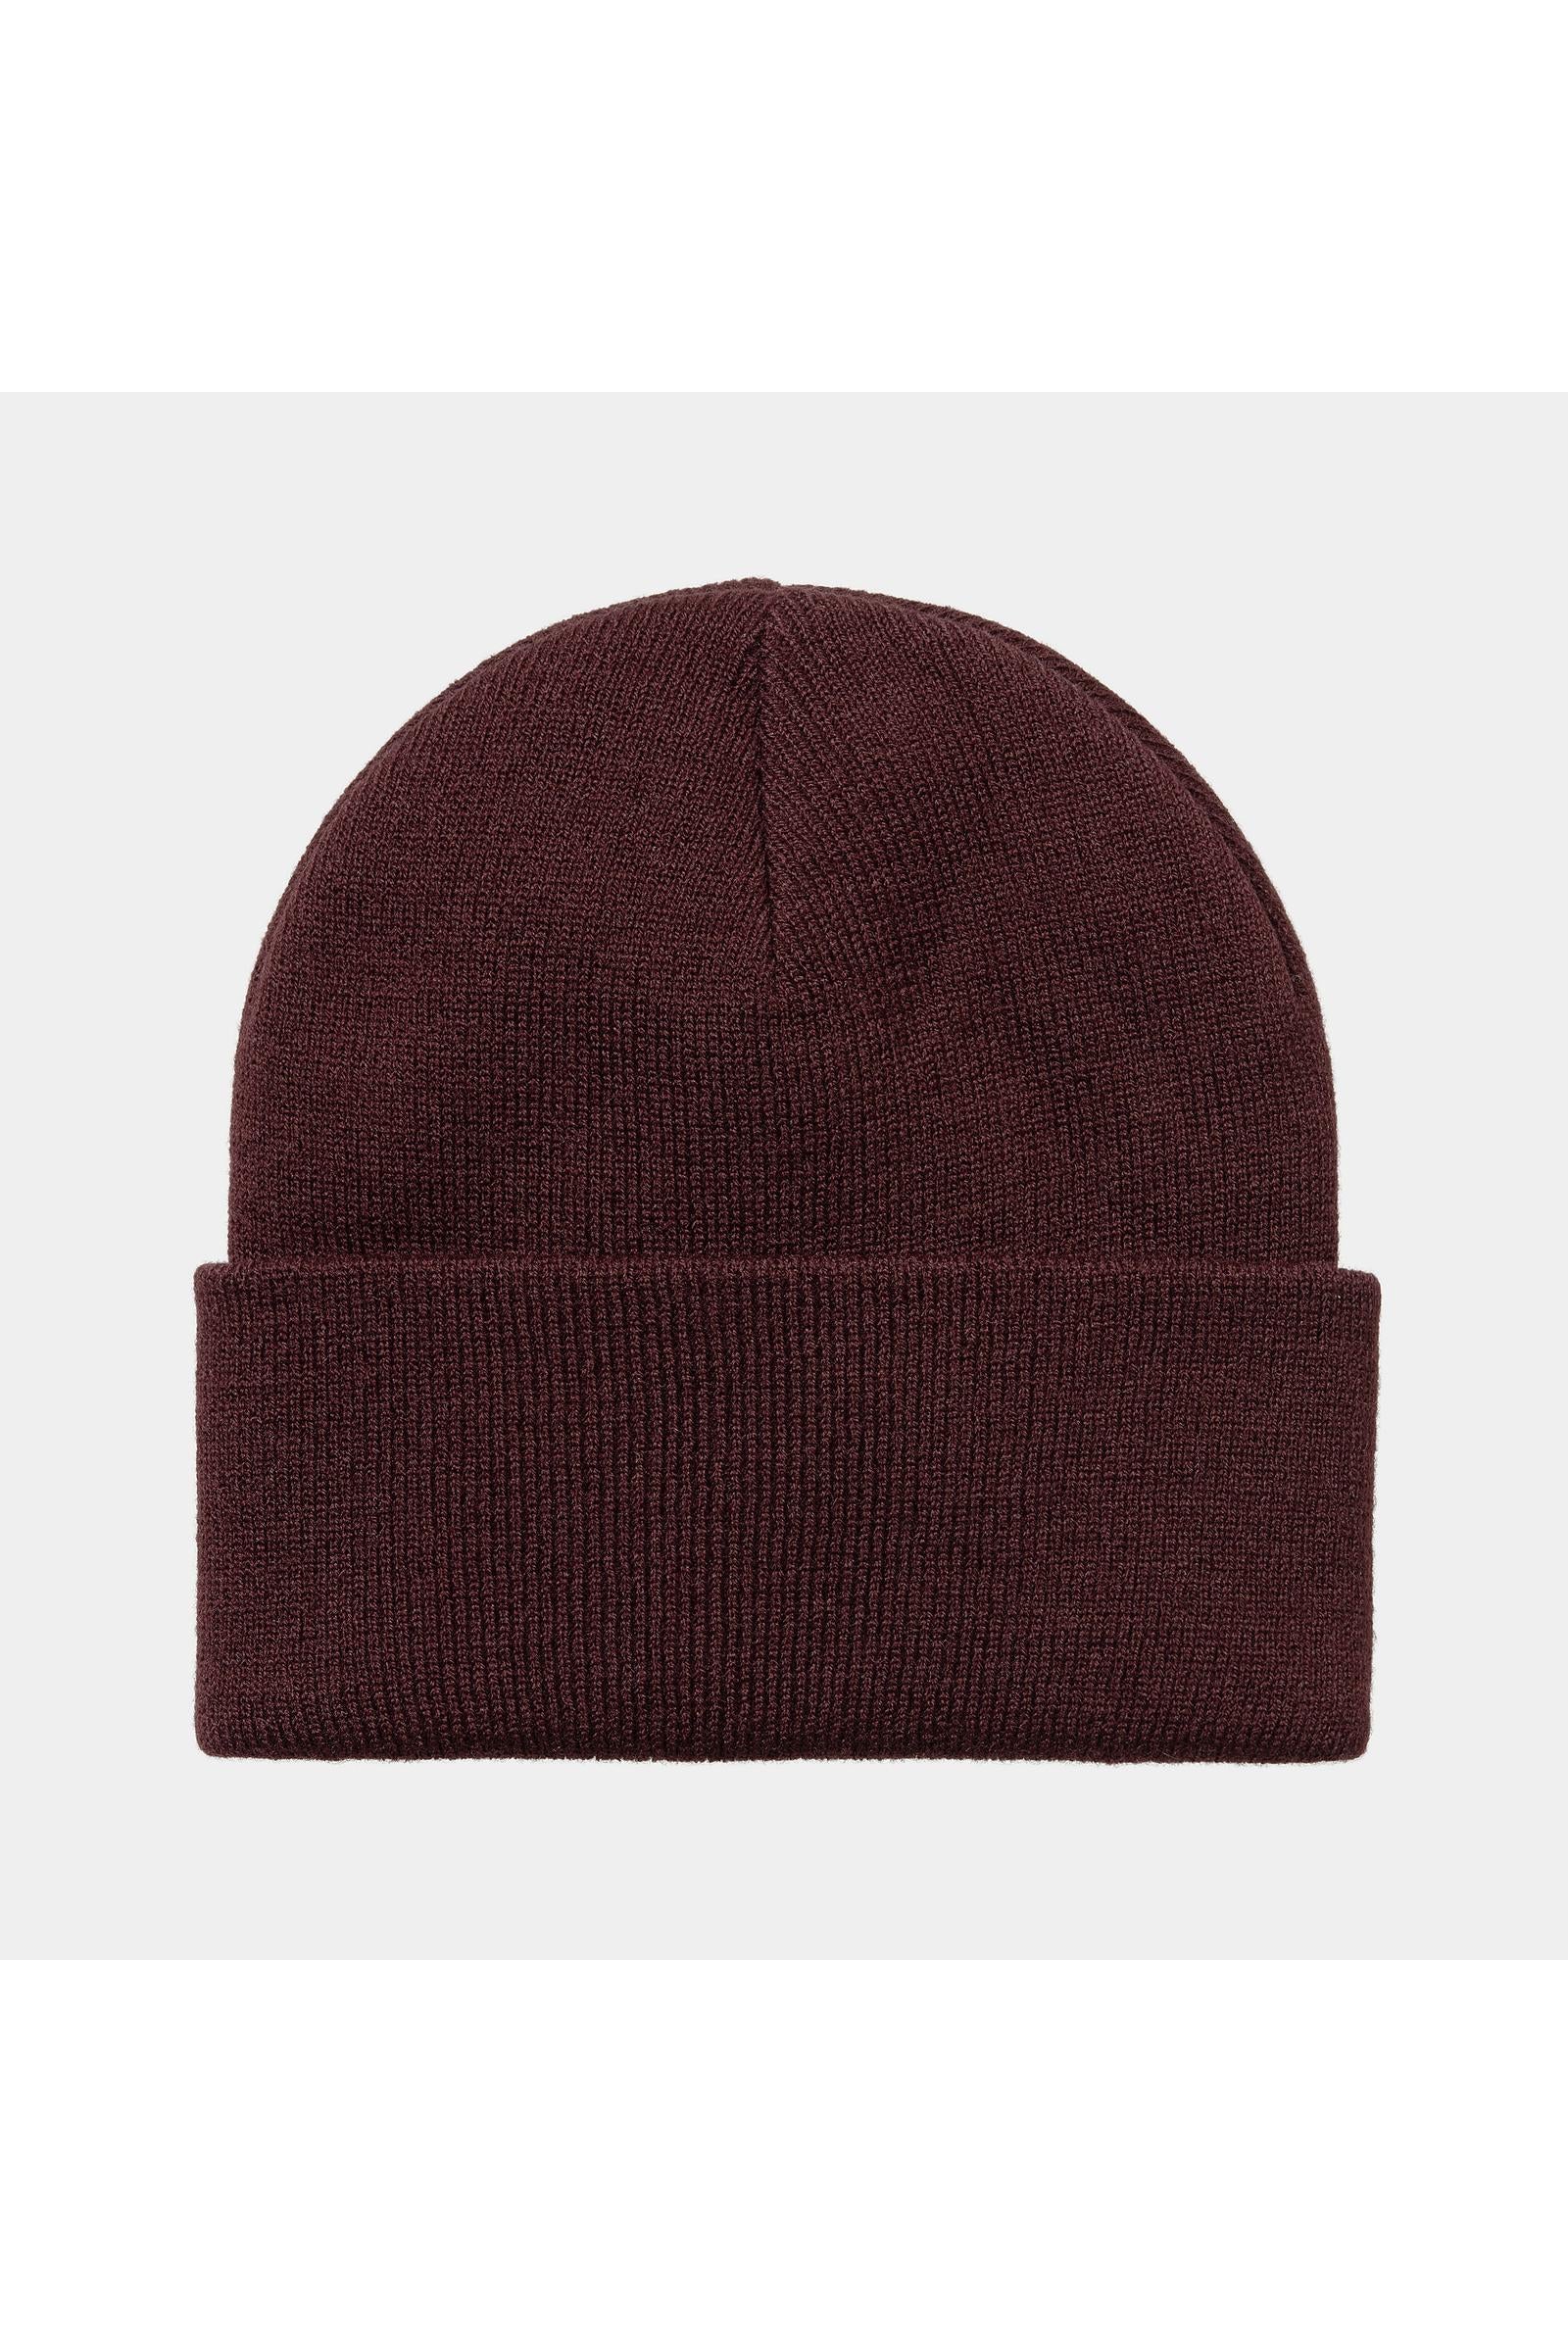 Chase Beanie-Amarone / Gold-Back View